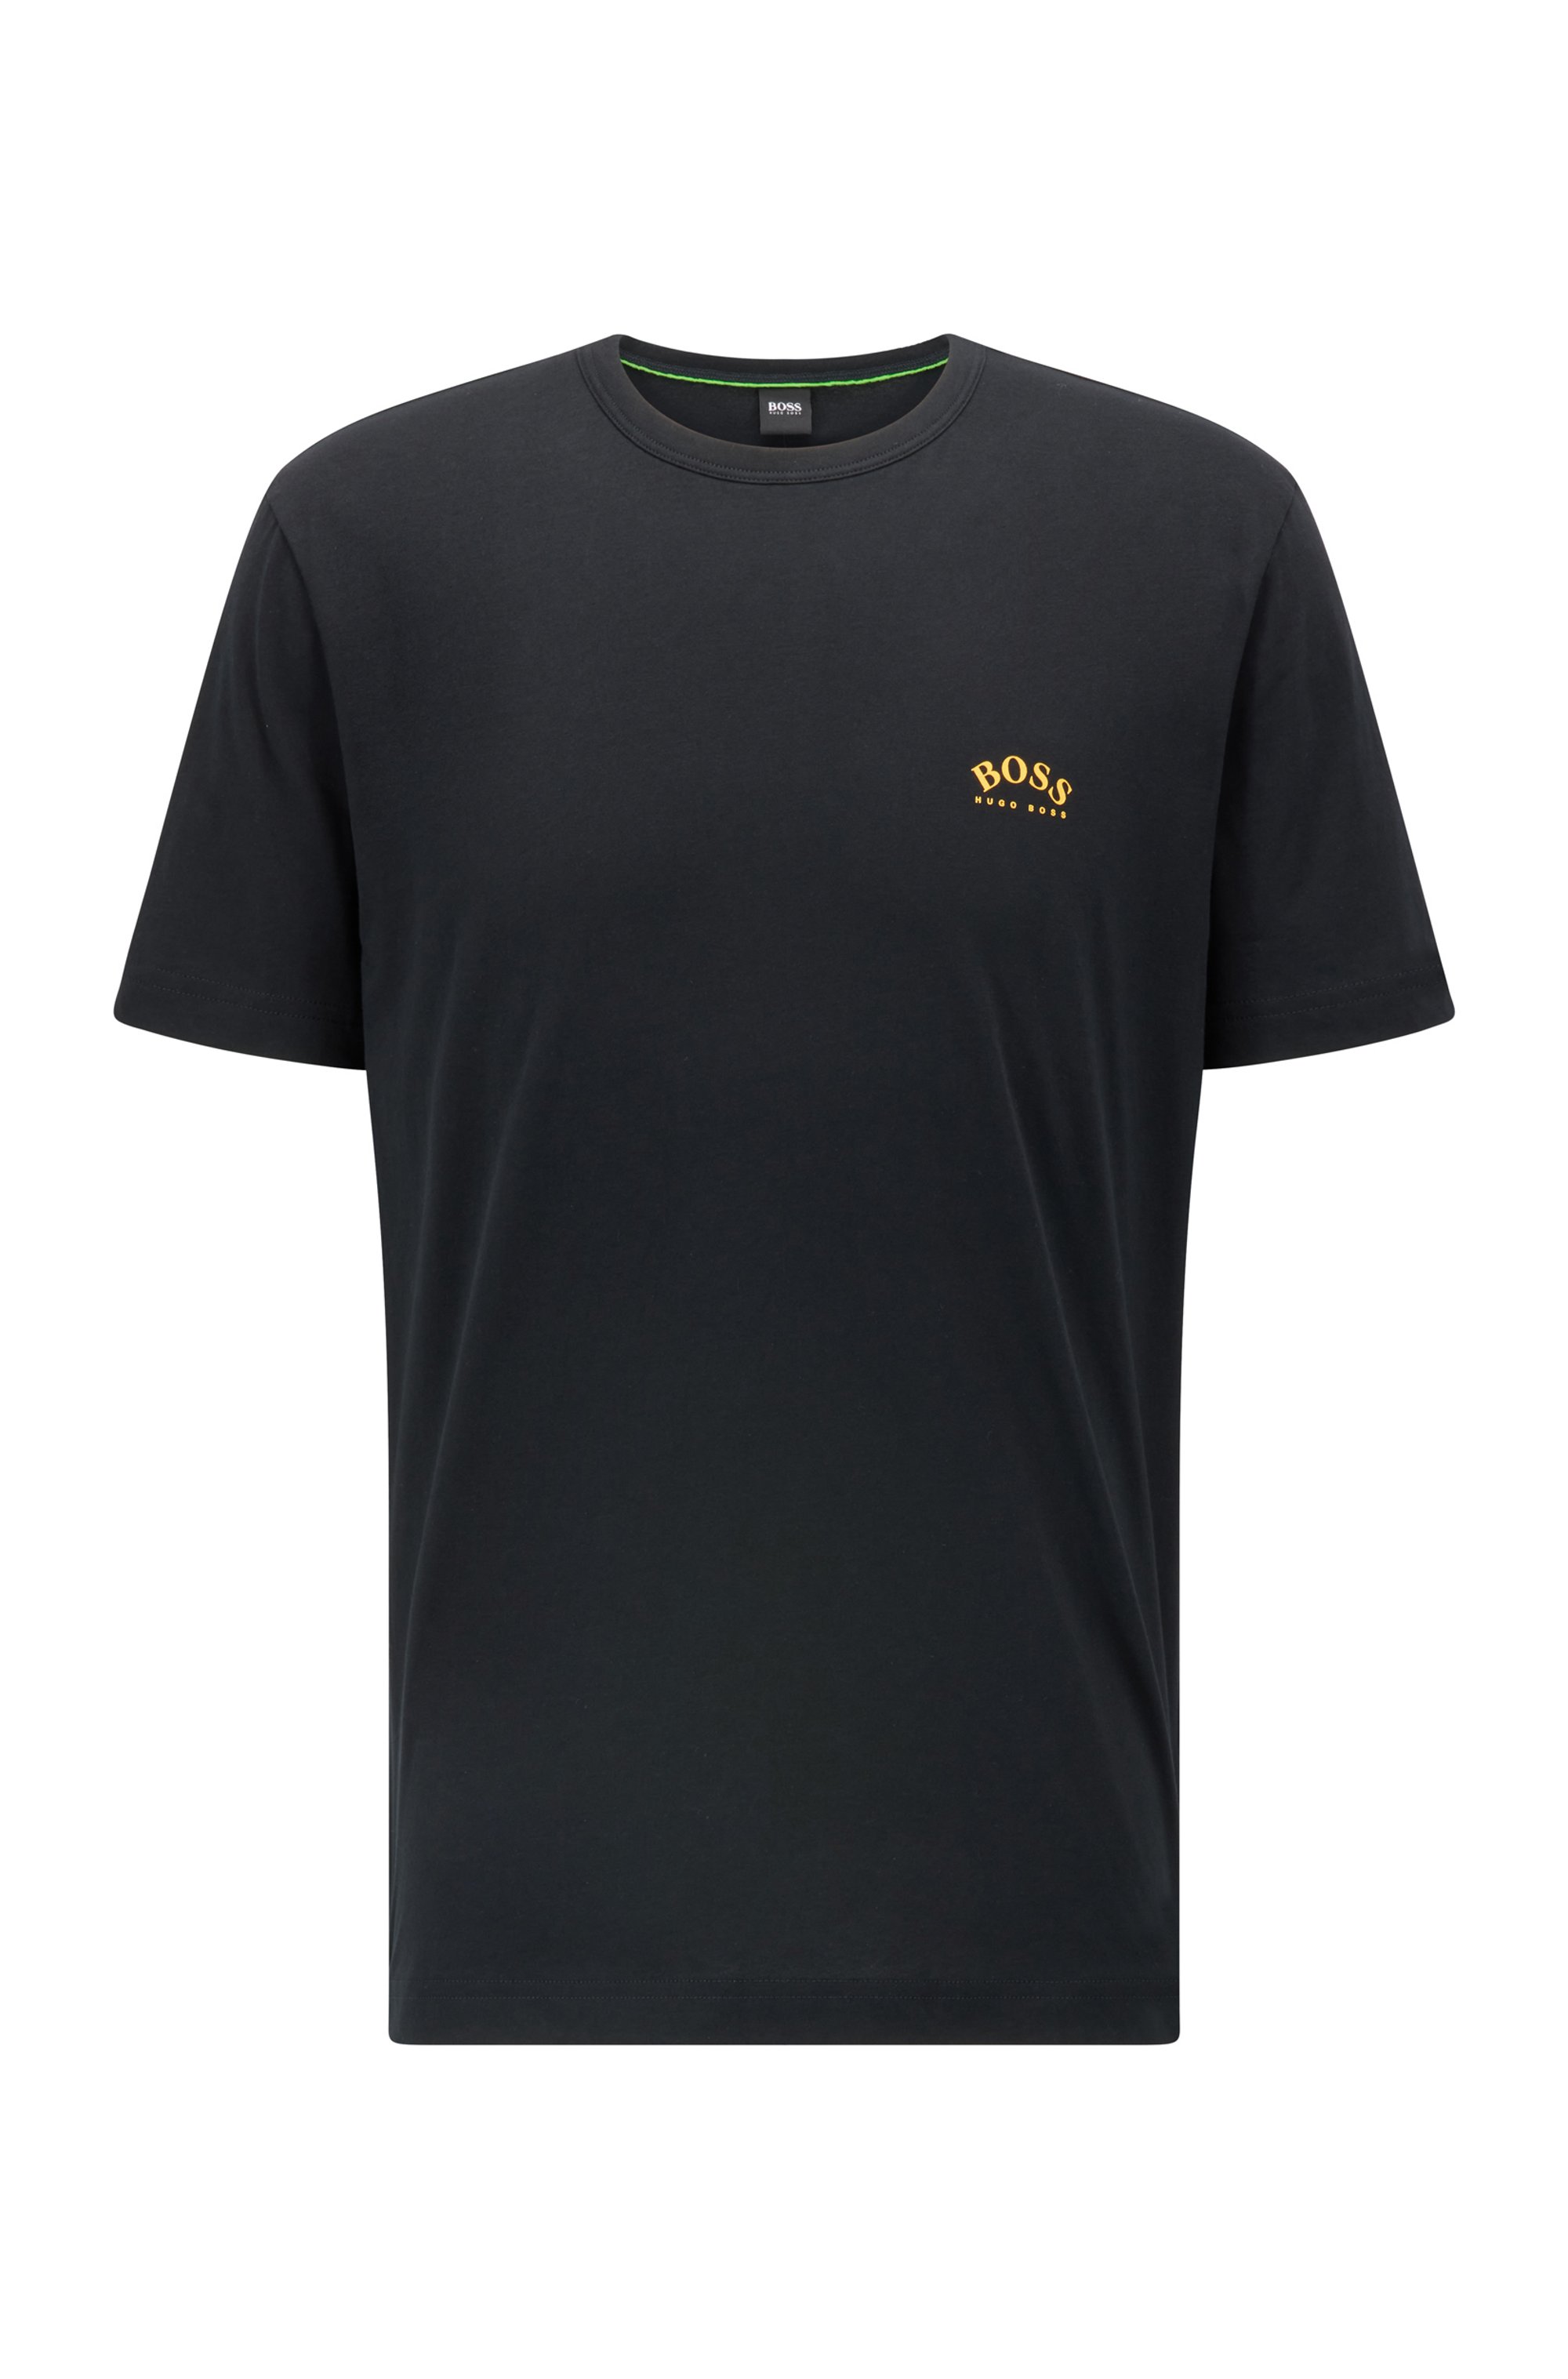 Cotton jersey T-shirt with curved logo, Dark Grey